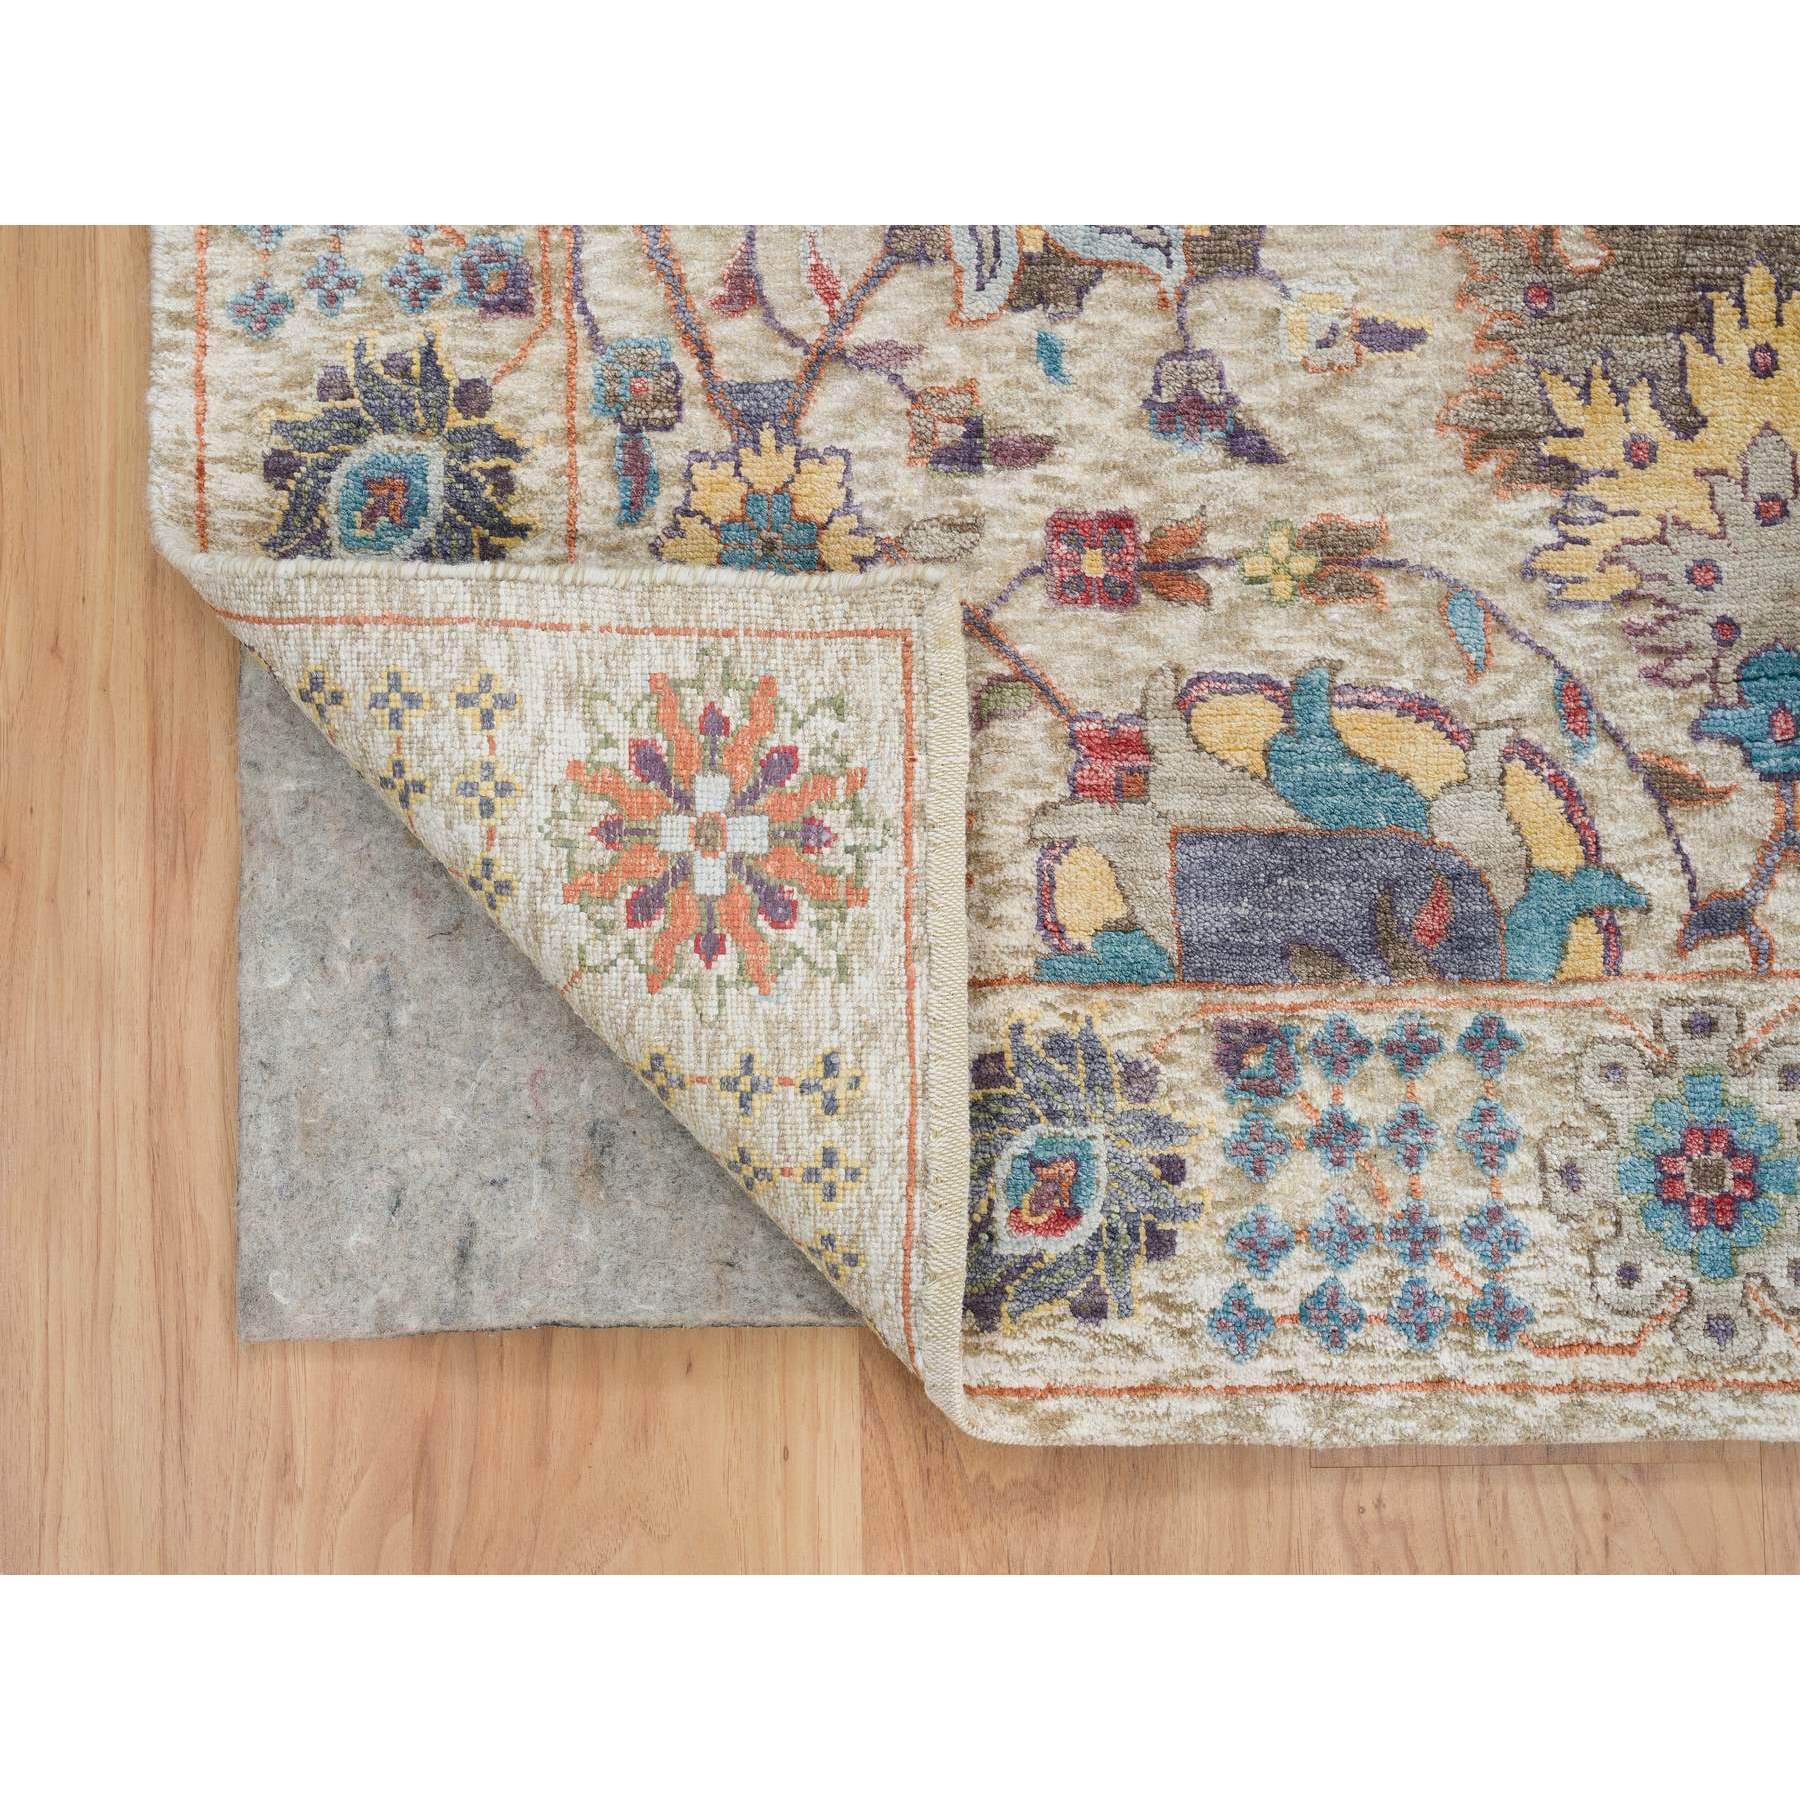  Silk Hand-Knotted Area Rug 8'3